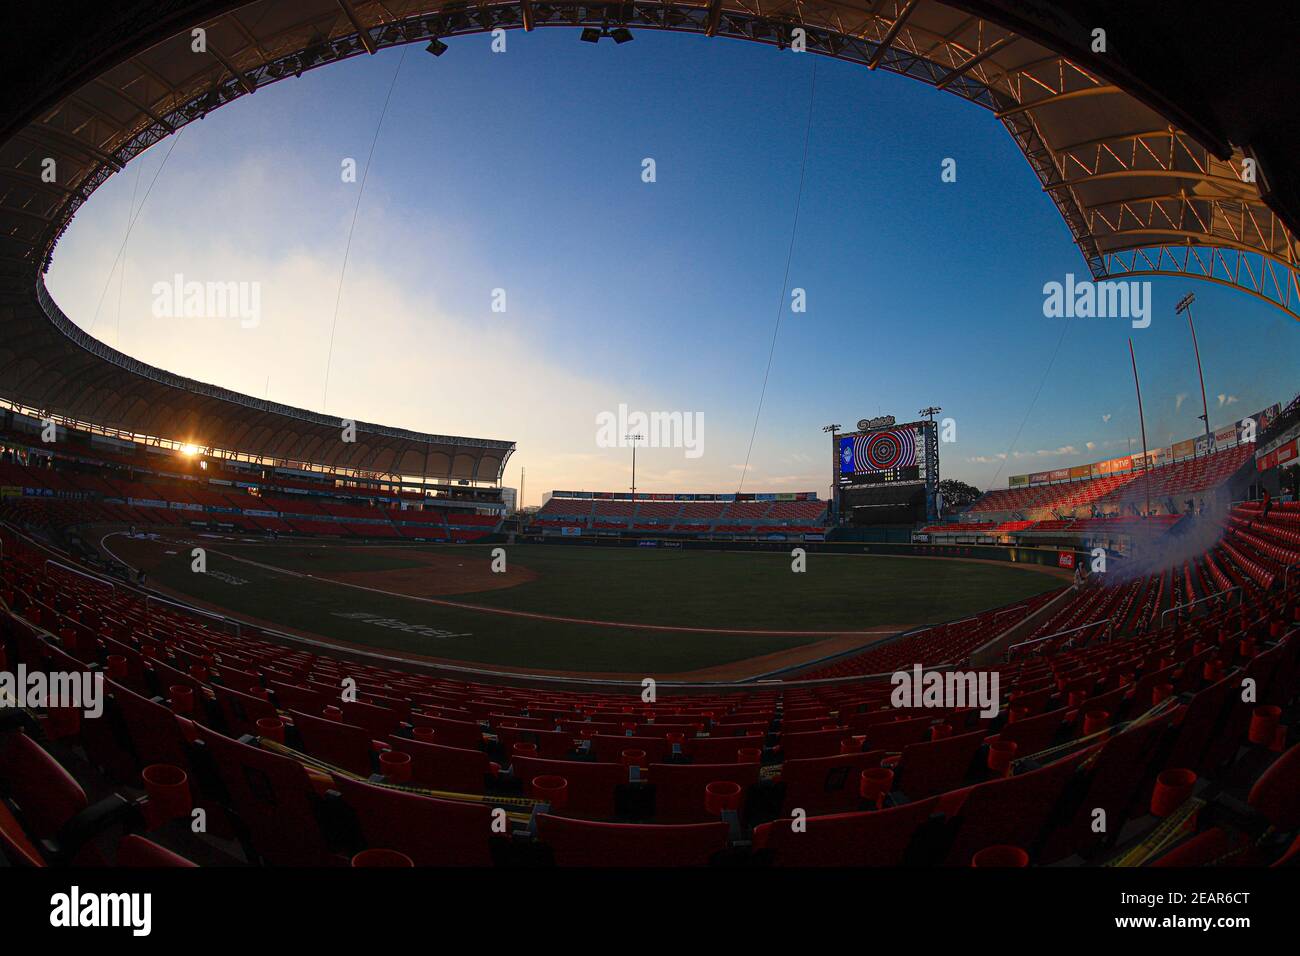 MAZATLAN, MEXICO - FEBRUARY 05: General view of the stadium at sunset, Serie del Caribe 2021 at Teodoro Mariscal Stadium on February 5, 2021 in Mazatlan, Mexico. (Photo by  Luis Gutierrez/Norte Photo/) Stock Photo